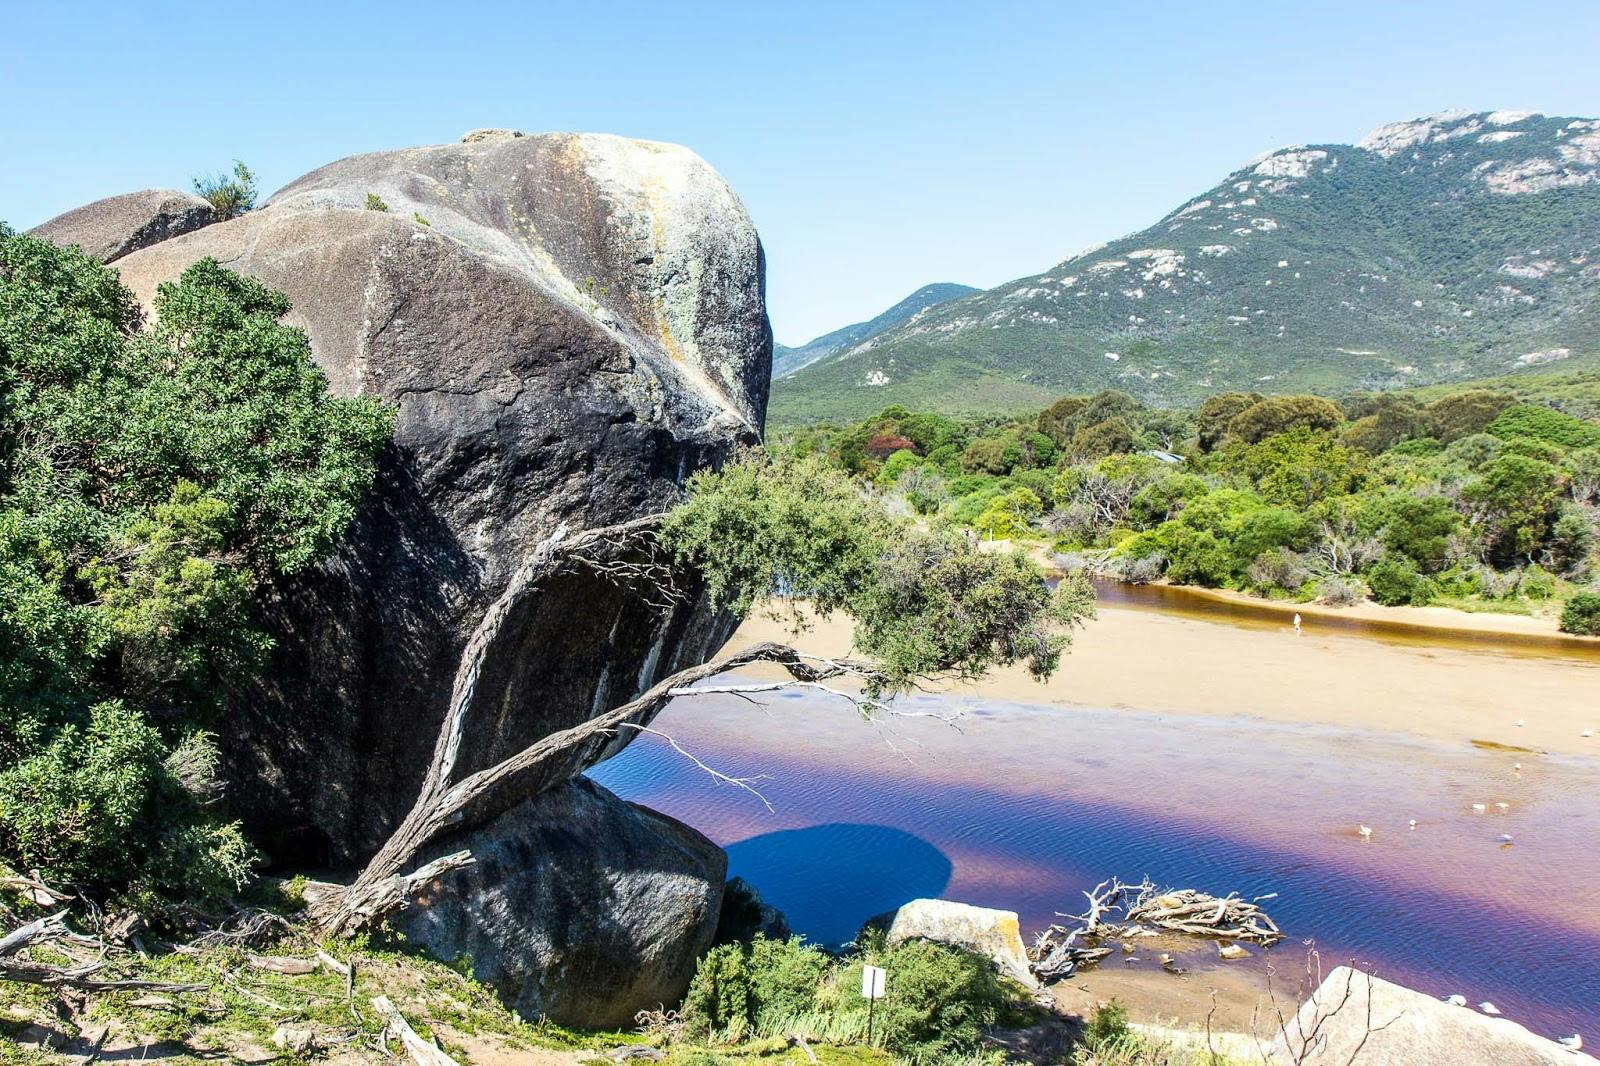 Image - Wilsons Promontory National Park